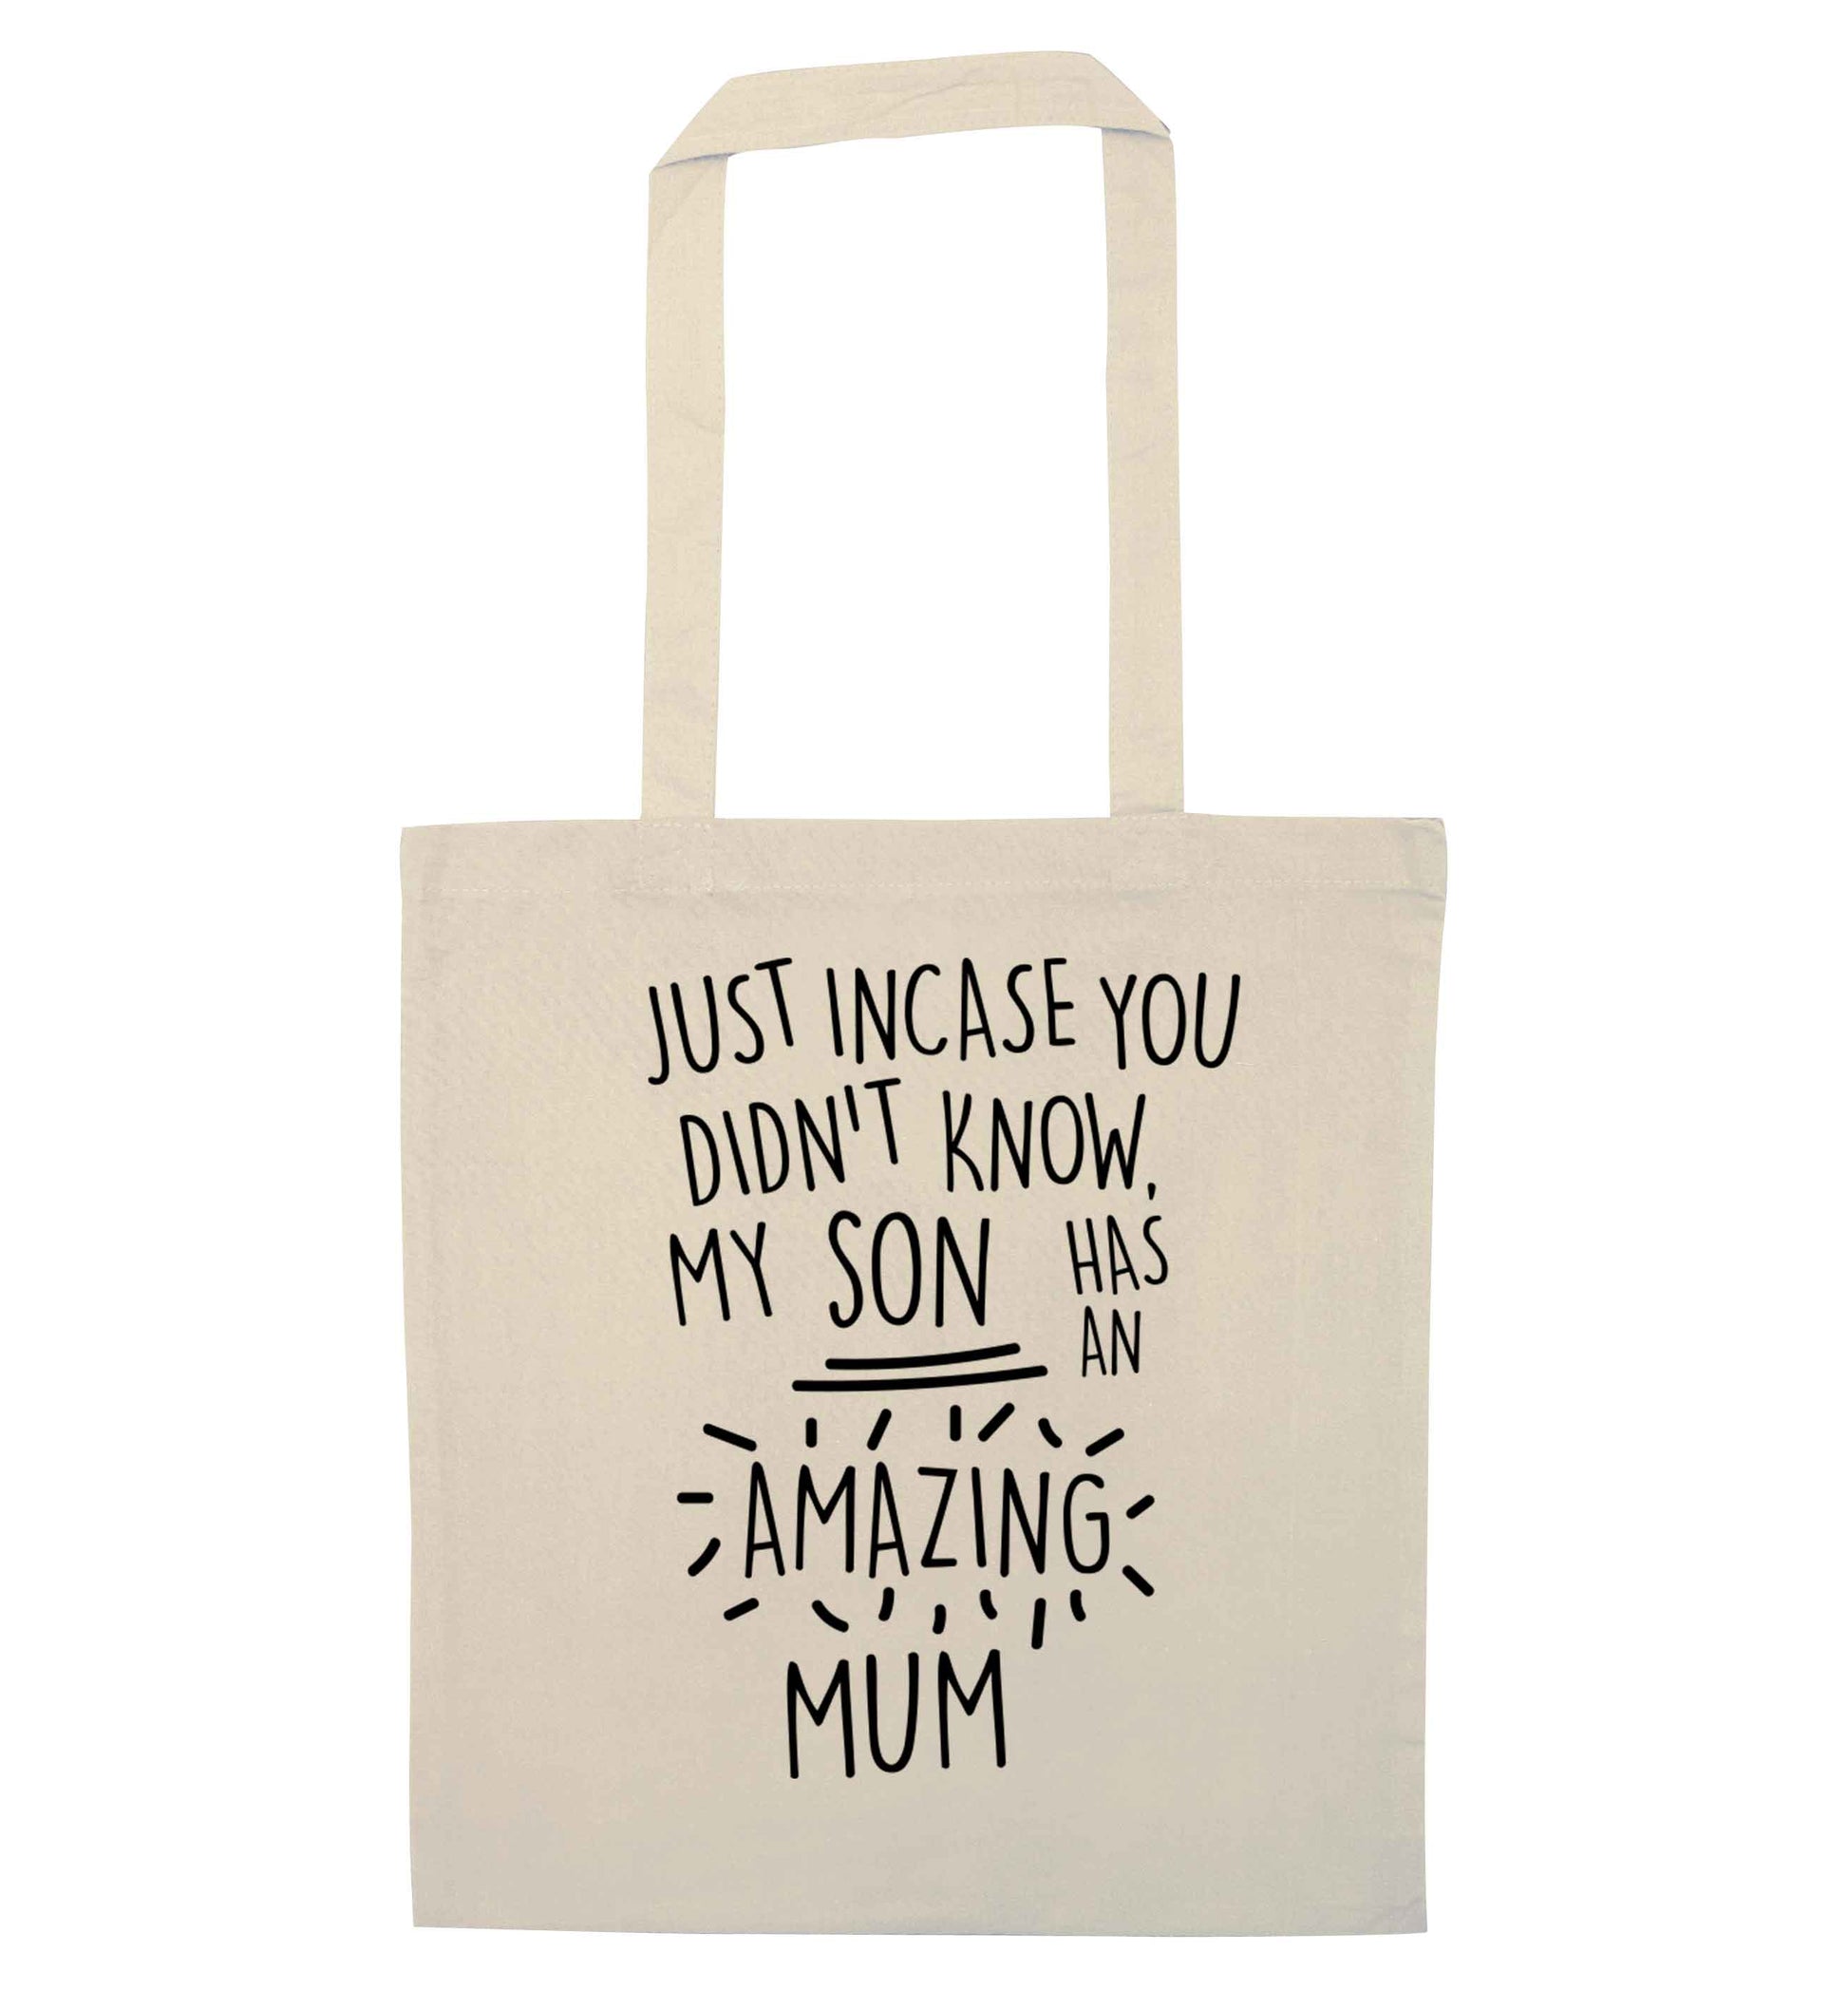 Just incase you didn't know my son has an amazing mum natural tote bag